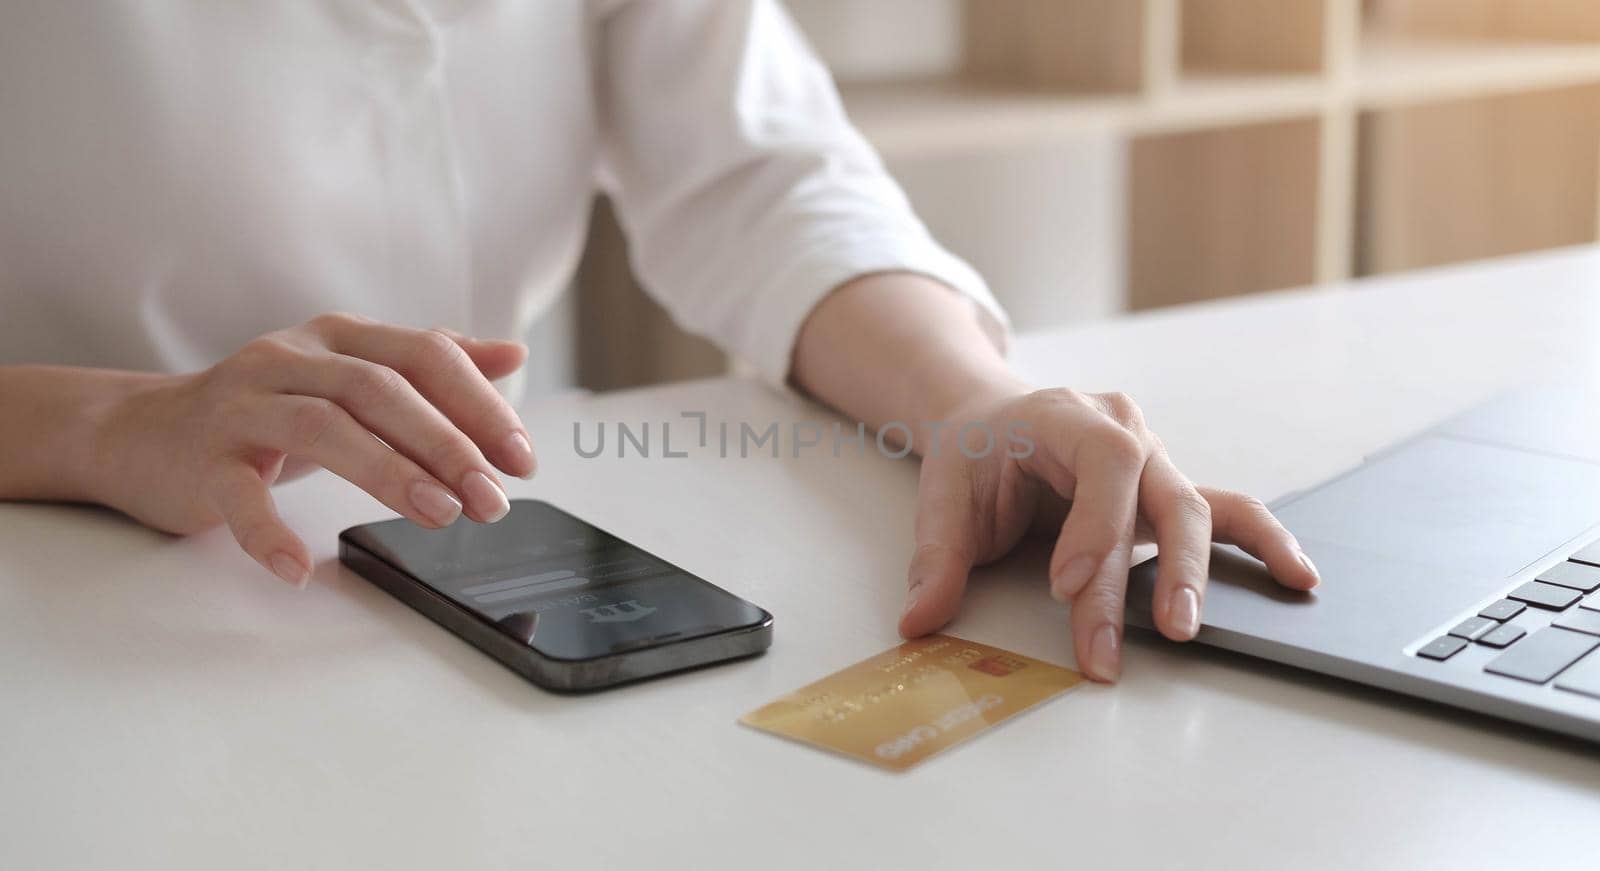 Online payment,Woman's hands holding smartphone and using credit card for online shopping.
